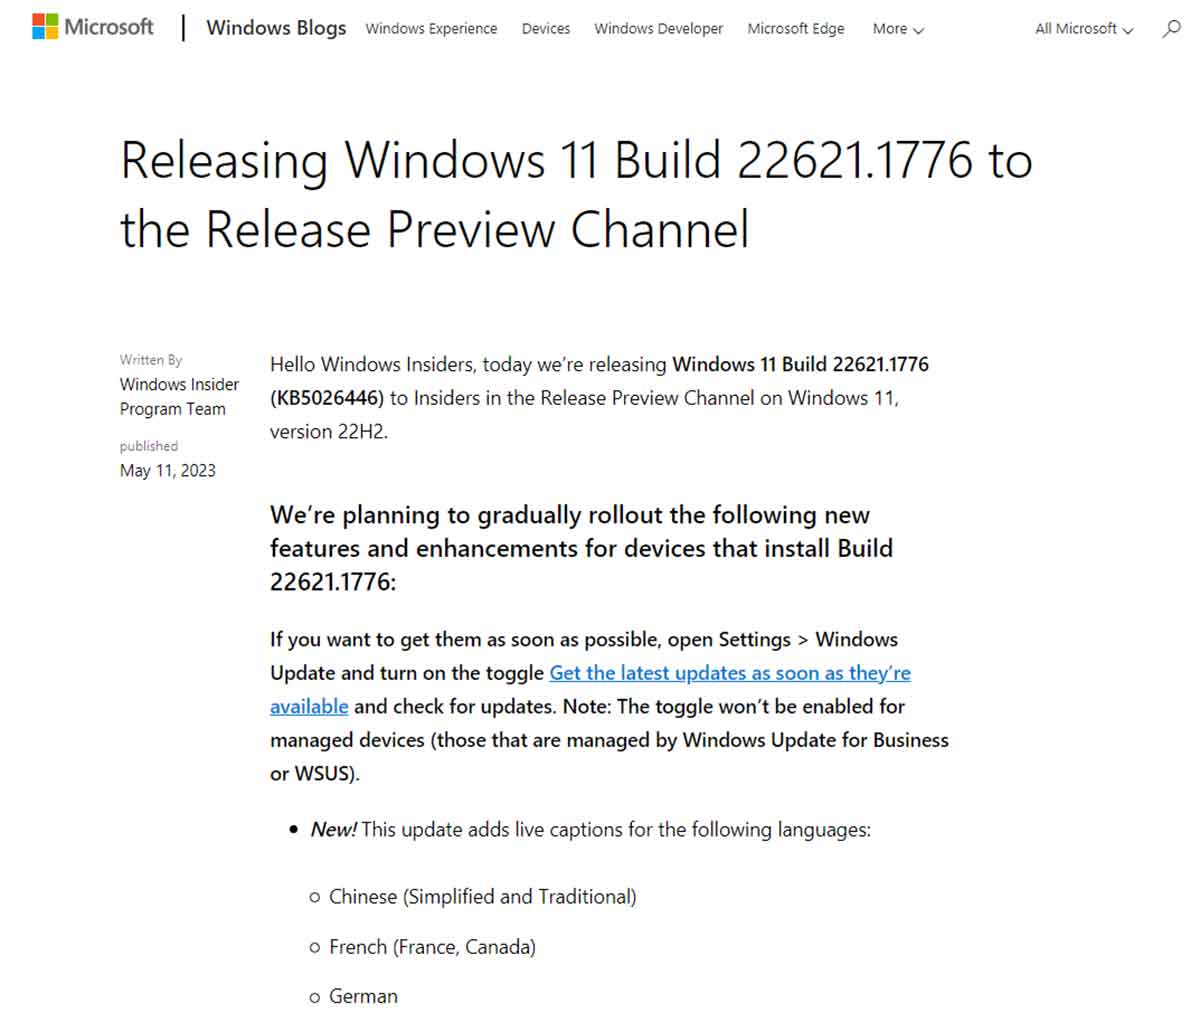 Releasing Windows 11 Build 22621.1776 to the Release Preview Channel